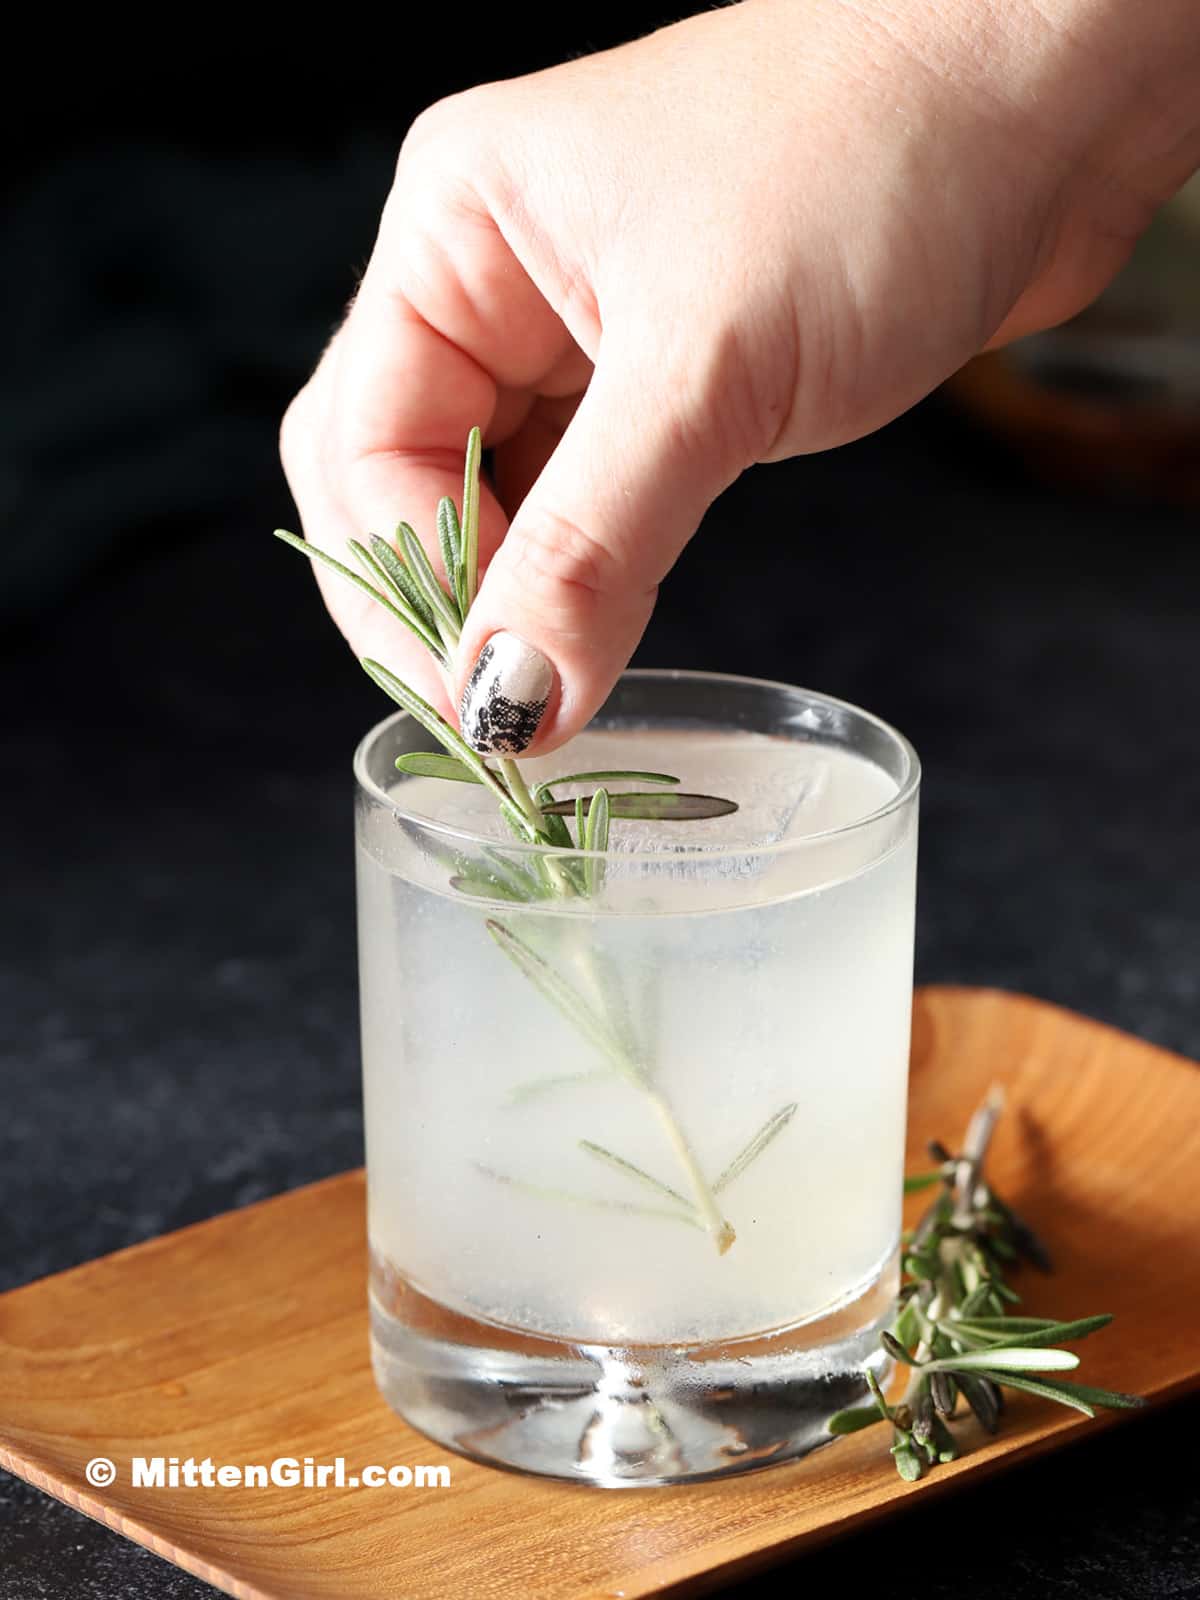 A hand placing a sprig of rosemary into the finished cocktail.